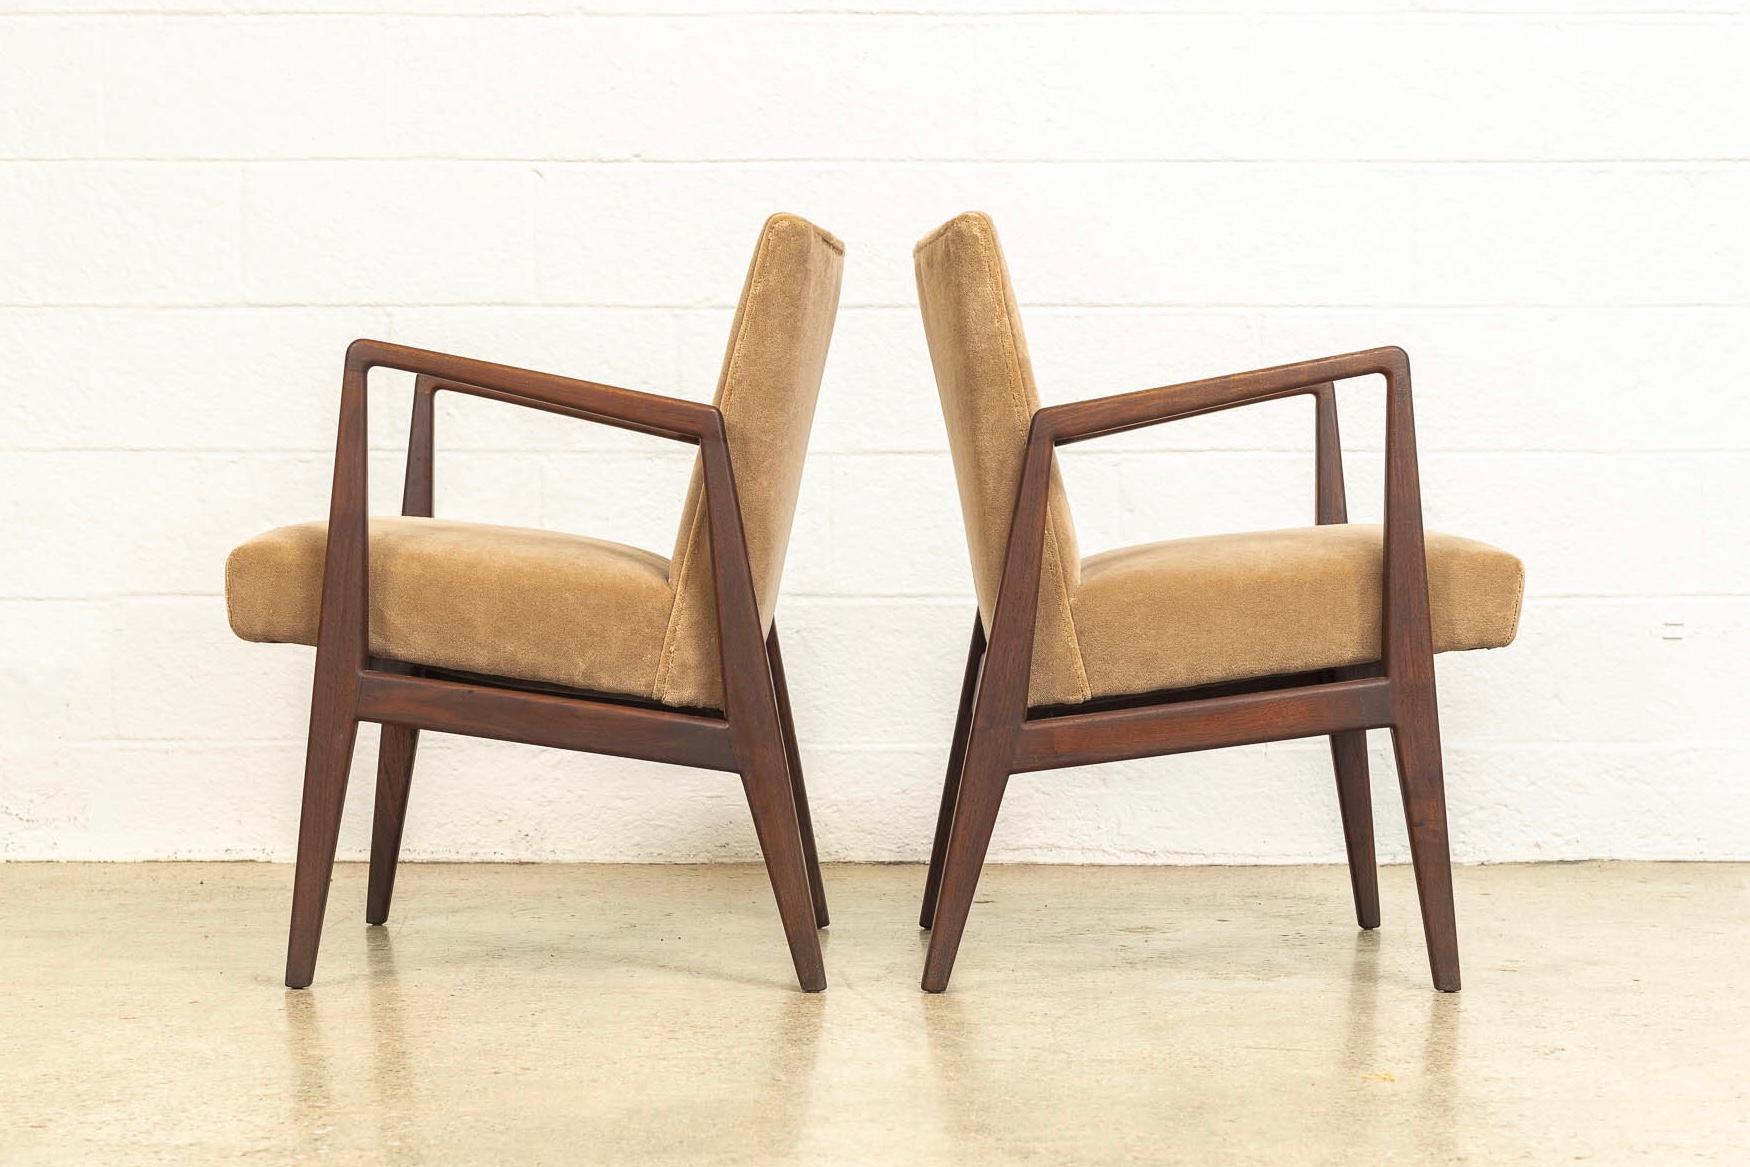 Midcentury Jens Risom Walnut Wood and Upholstered Lounge Armchairs, a Pair In Good Condition For Sale In Detroit, MI